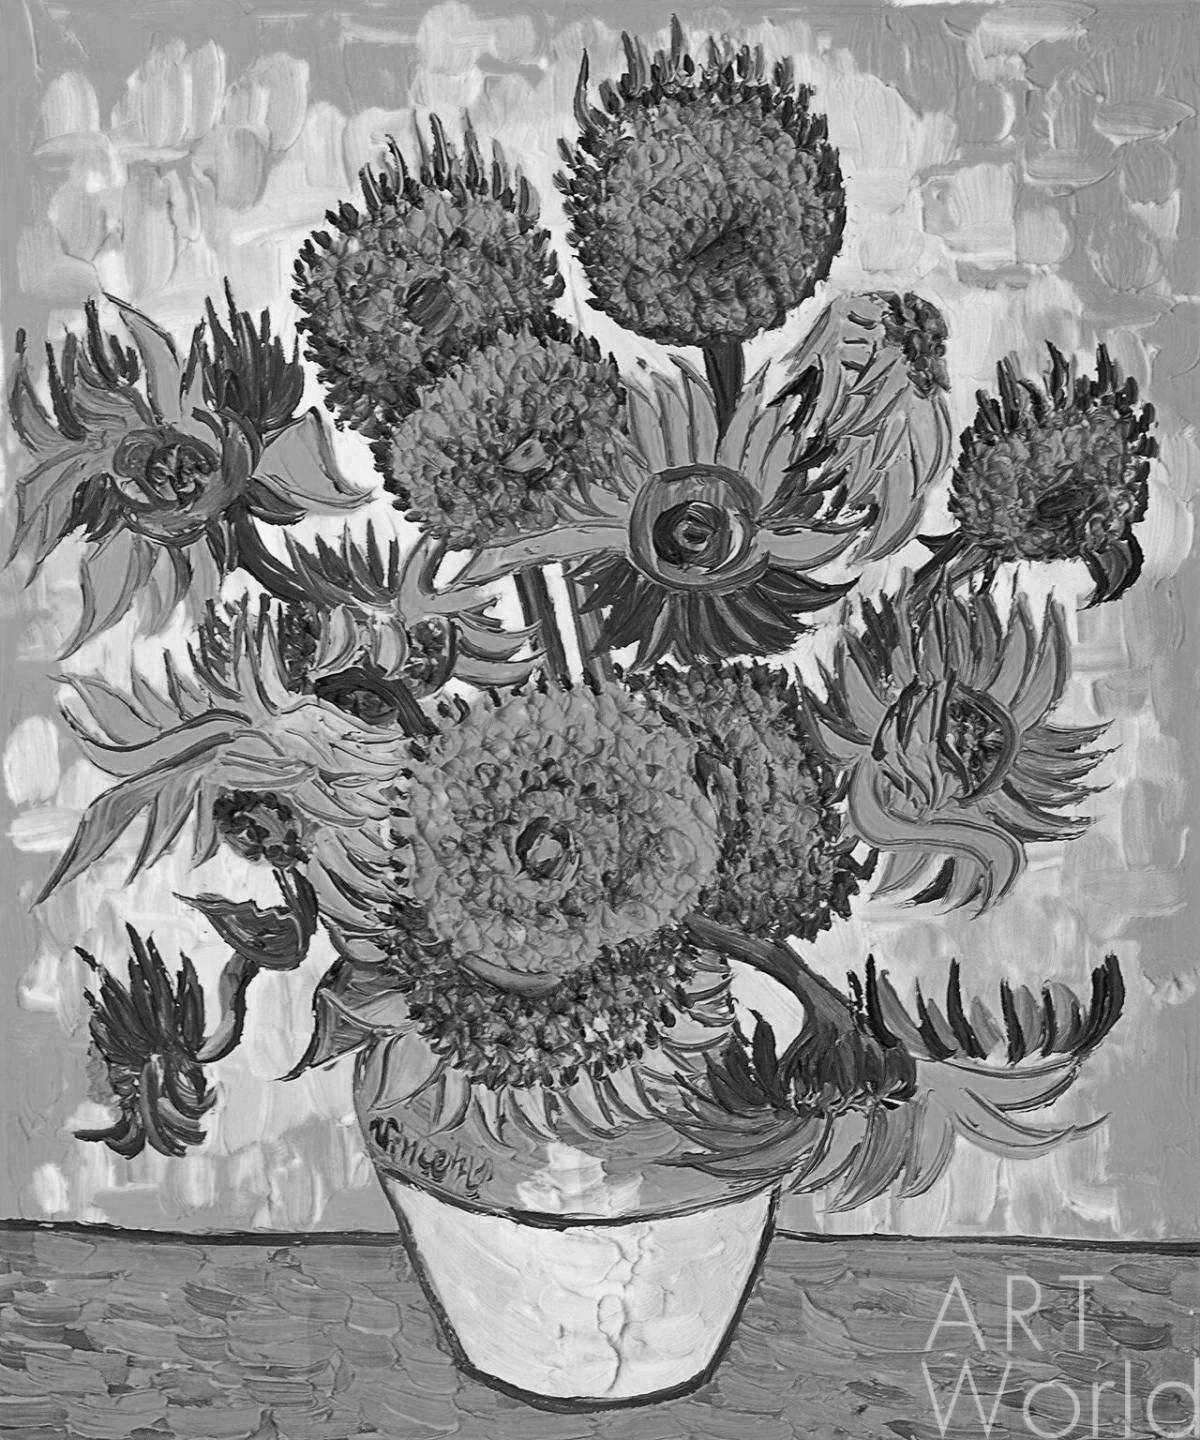 Van Gogh's wonderfully shaded sunflowers coloring book